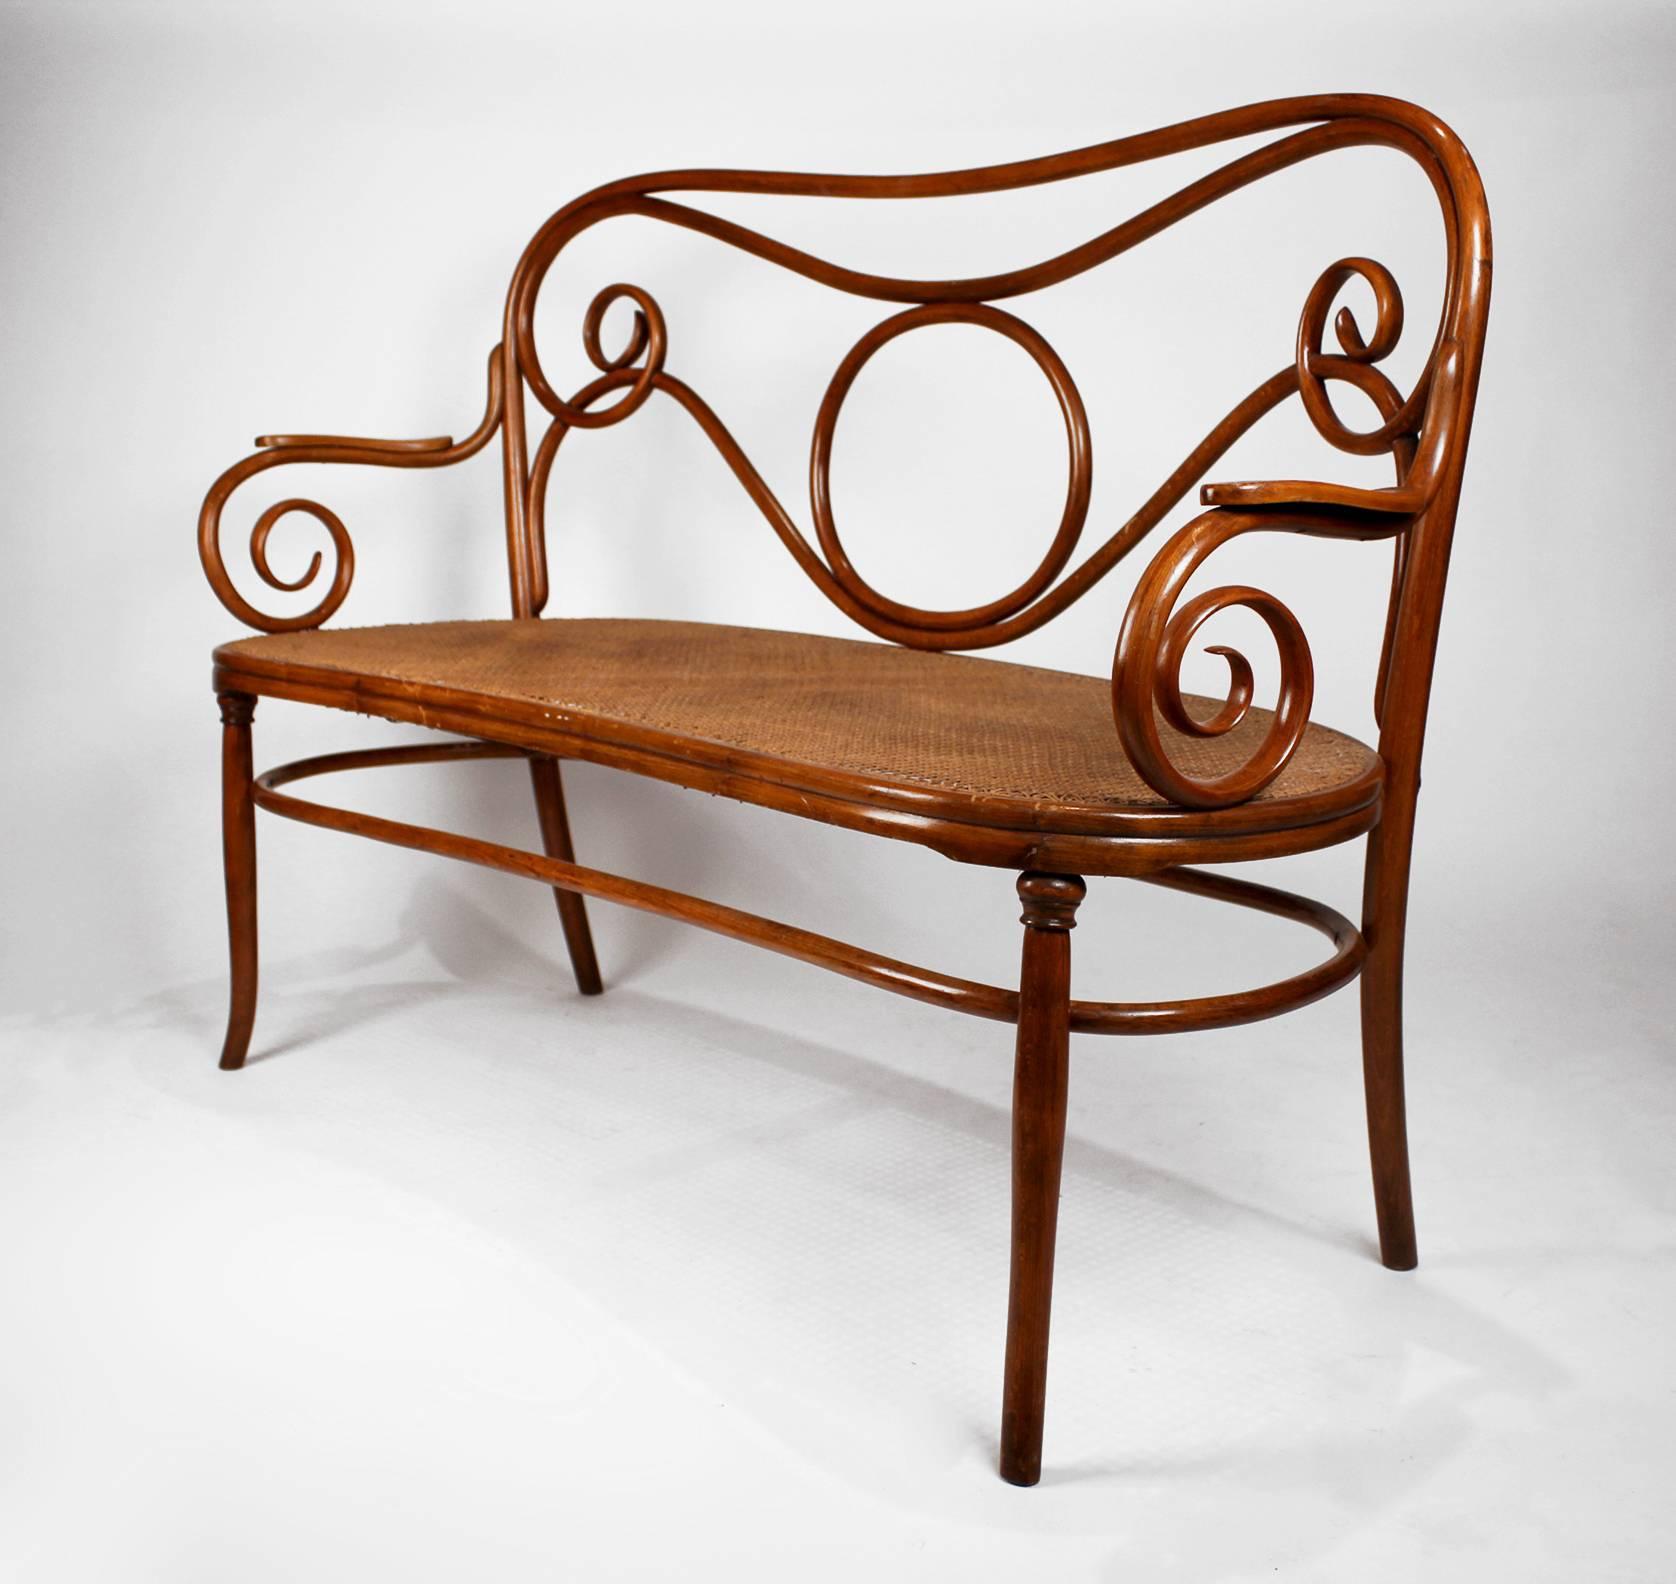 This is an early, rare example of the exceptional work of the Thonet Brothers from Vienna Austria.
The settee is in remarkable condition for its age considering that it was made in the late 19th century.
A functional work of art!